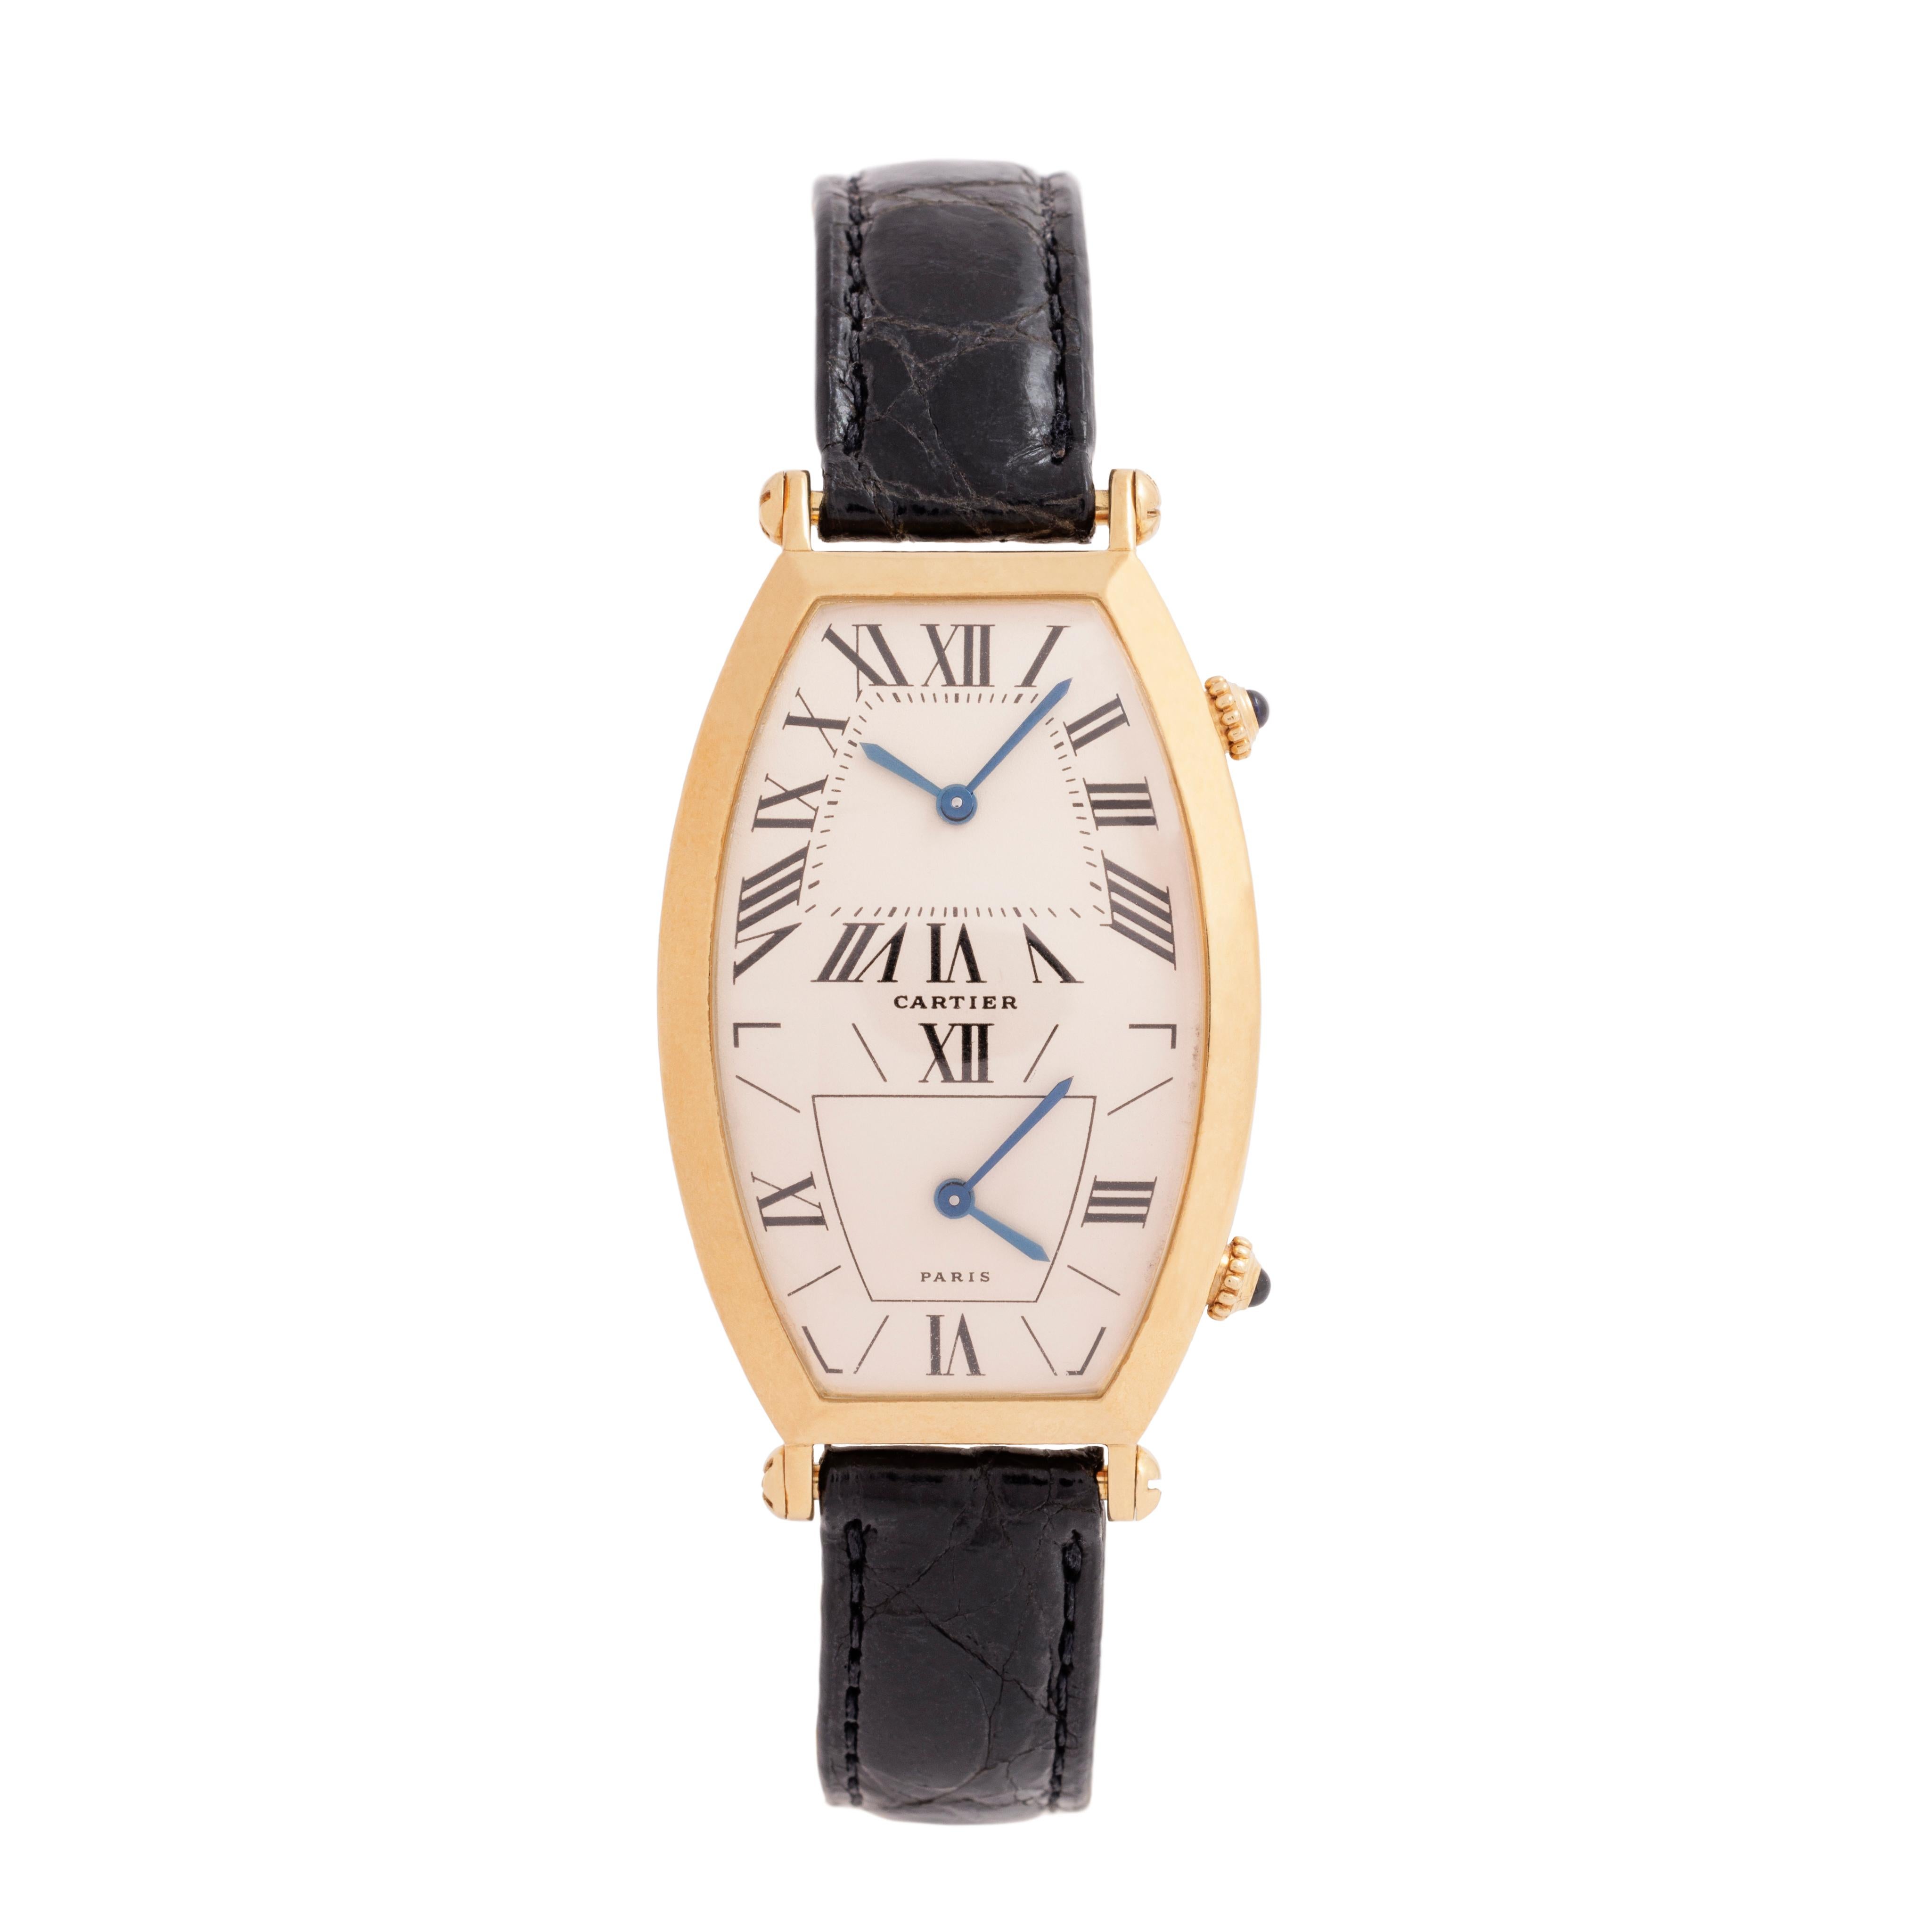 Vintage Cartier Tonneau Dual-Time 18k Yellow Gold Large Size On Cartier Black Alligator Strap and 18k Yellow Gold Deployment Buckle
46mm x 26mm
Model # W1502853
Quartz Movement
c.1990s

Crafted with precision and practicality, the Cartier Tonneau